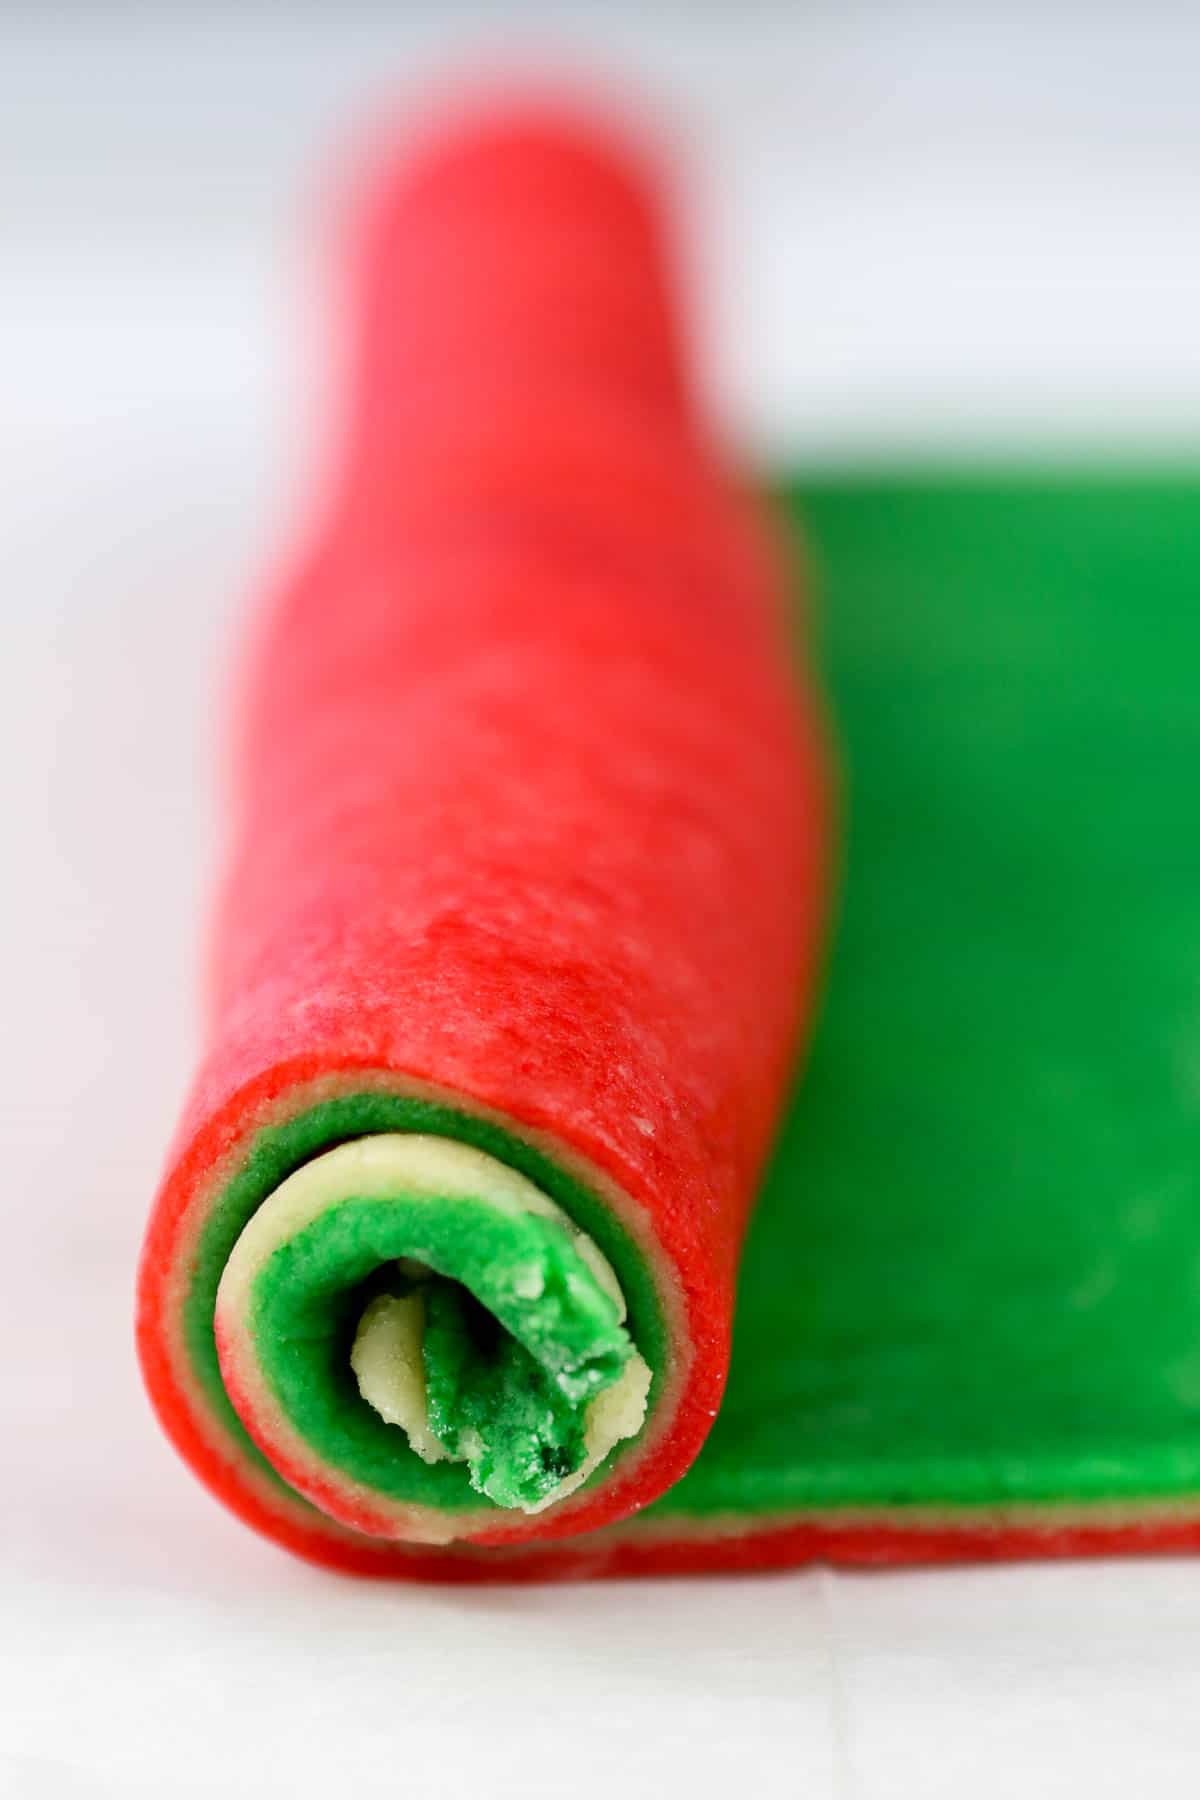 Layers of red, white, and green cookie dough is rolled up into a log.